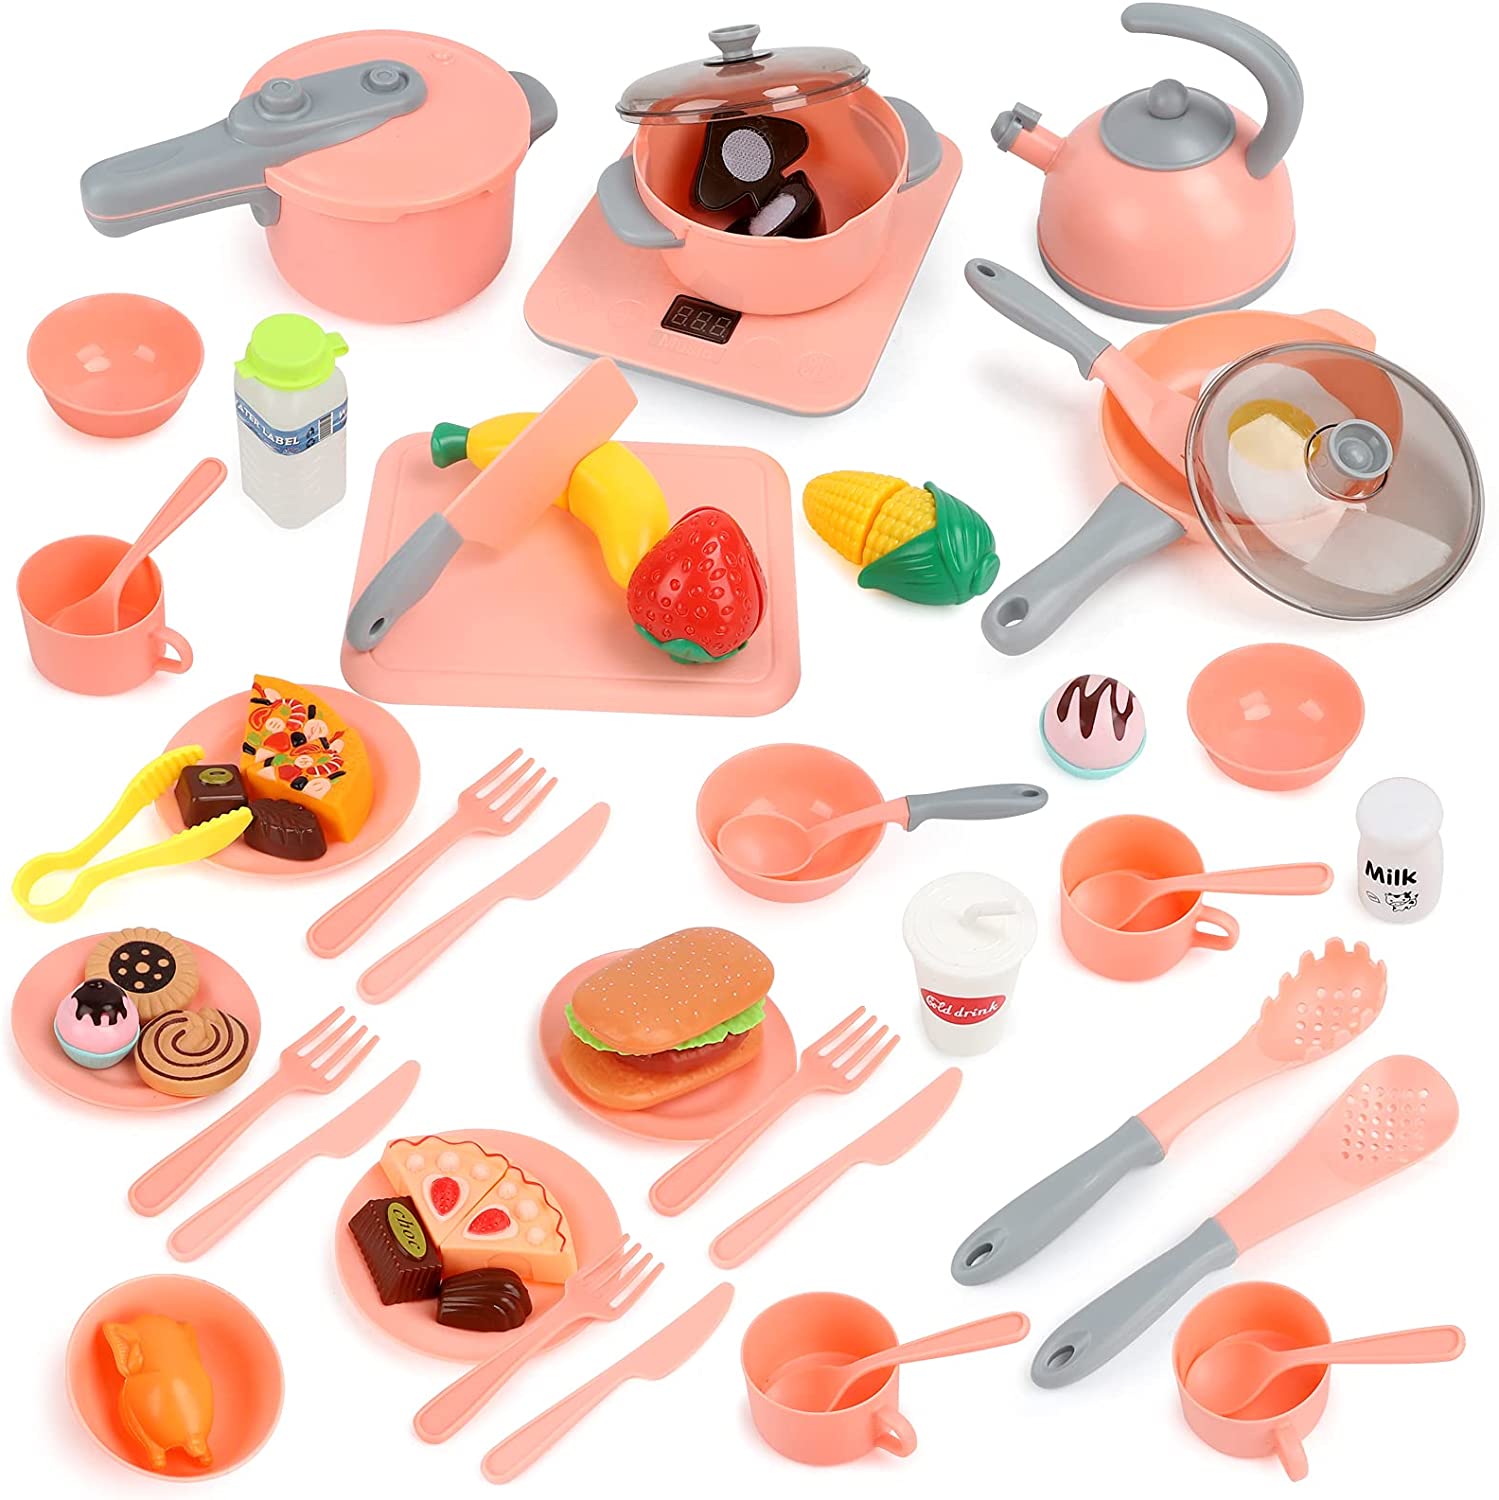 Big discounting Wooden Magic Toy - BeebeeRun Kids Kitchen Pretend Play Toys 61PCS Cooking Set for Toddlers Cookware Pots and Pans Playset, Cooking Utensils, Toy Cutlery, Cutting Play Food – ...